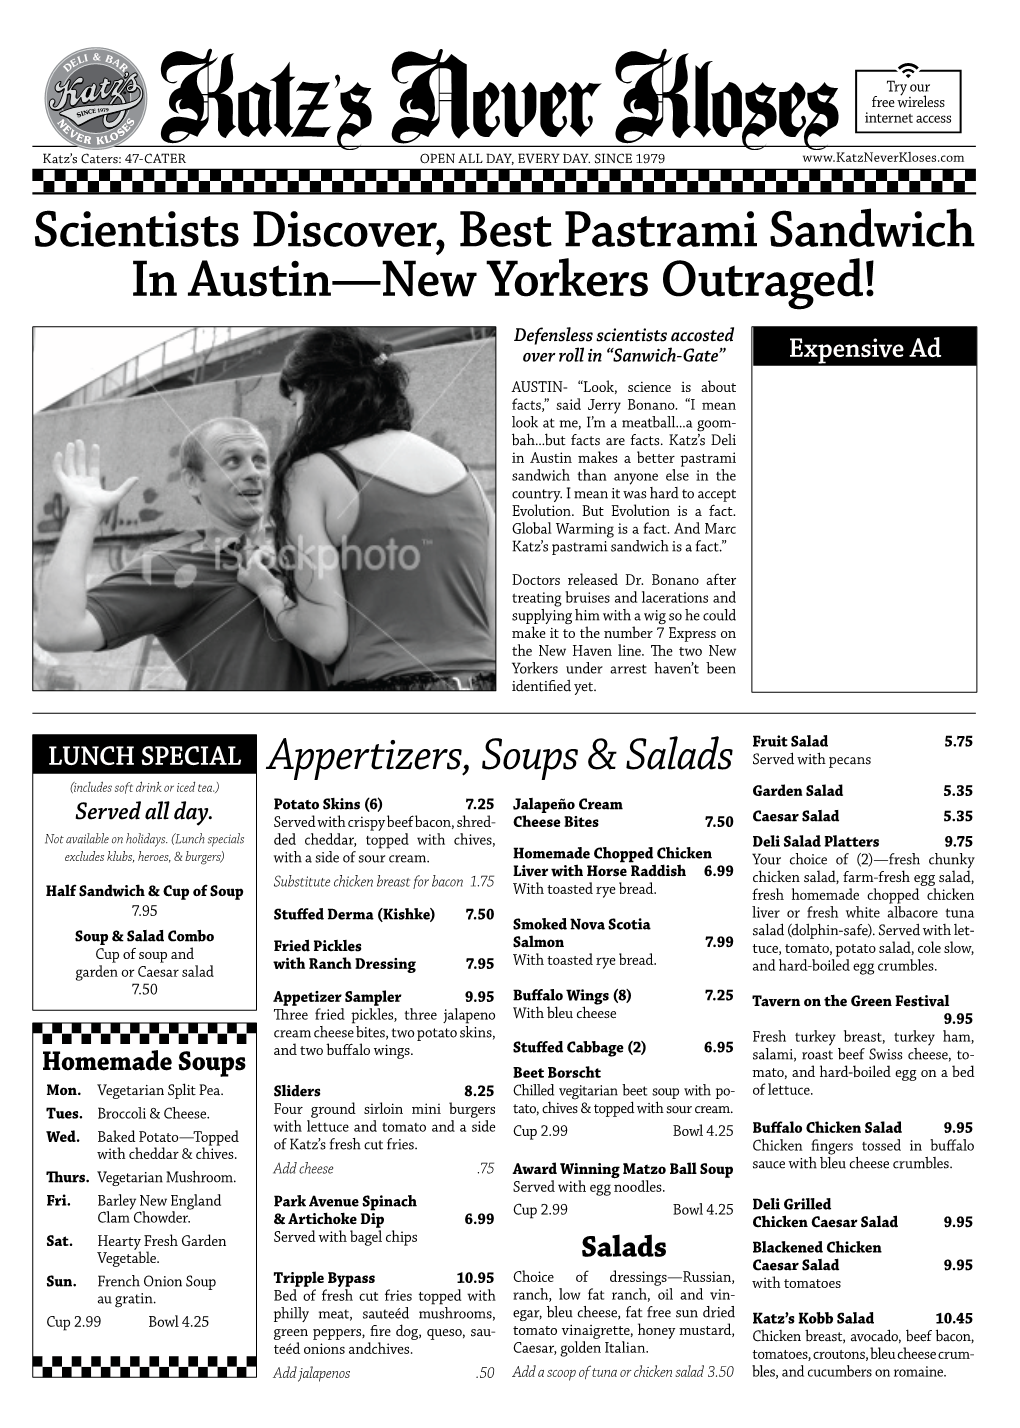 Scientists Discover, Best Pastrami Sandwich in Austin—New Yorkers Outraged!